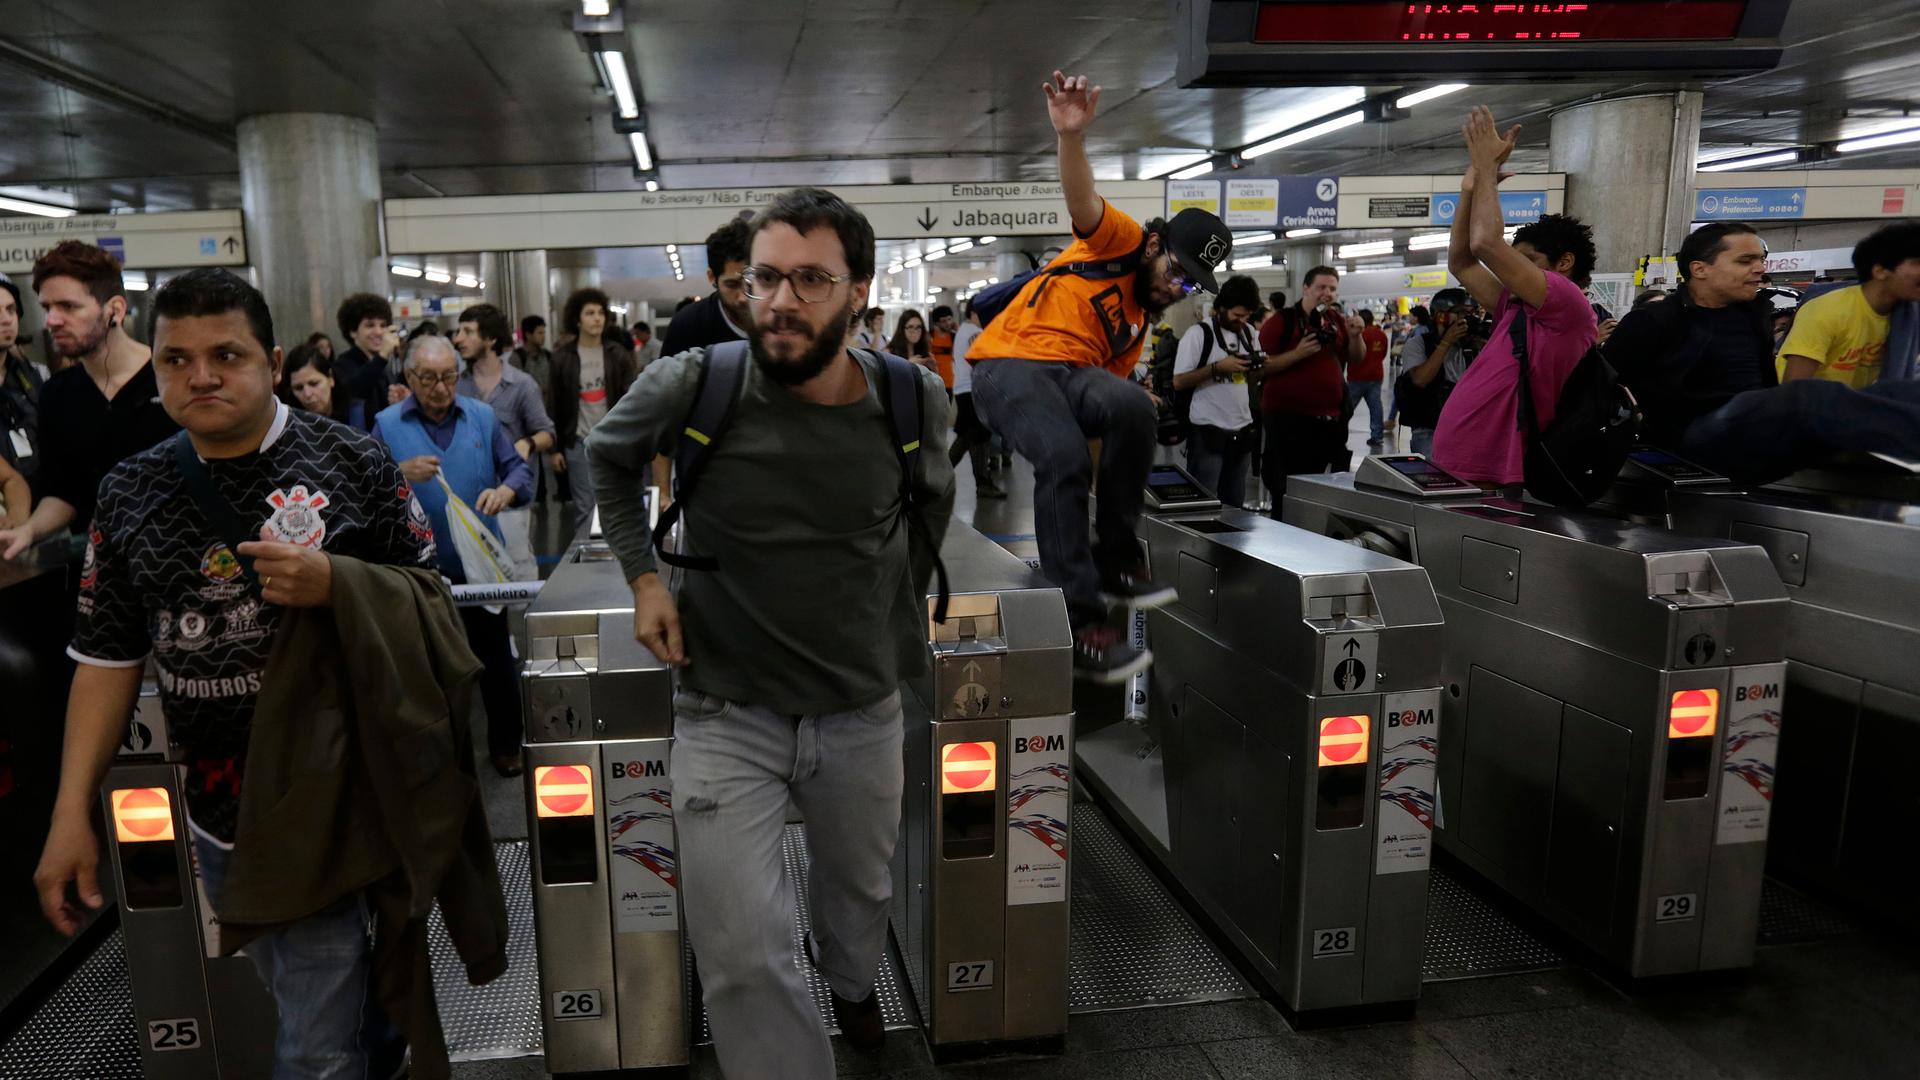 Demonstrators jump over the turnstiles without paying subway fare in support of a strike by metro workers in Sao Paulo June 9, 2014. Brazilian police used tear gas on Monday to disperse metro workers on strike in Sao Paulo in defiance of a court order to